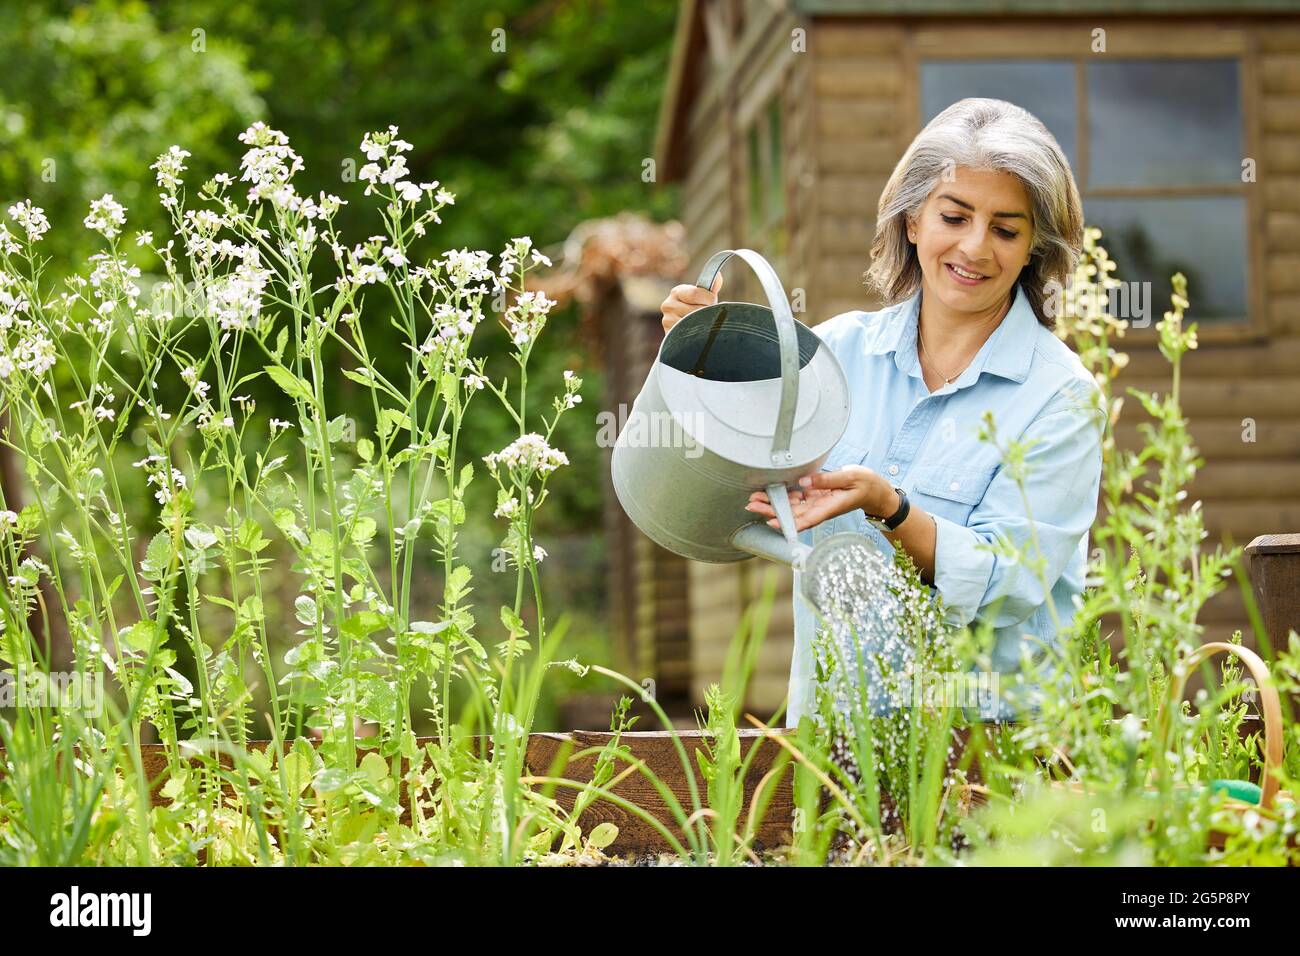 Mature Woman In Garden At Home Watering Vegetables In Raised Beds Stock Photo